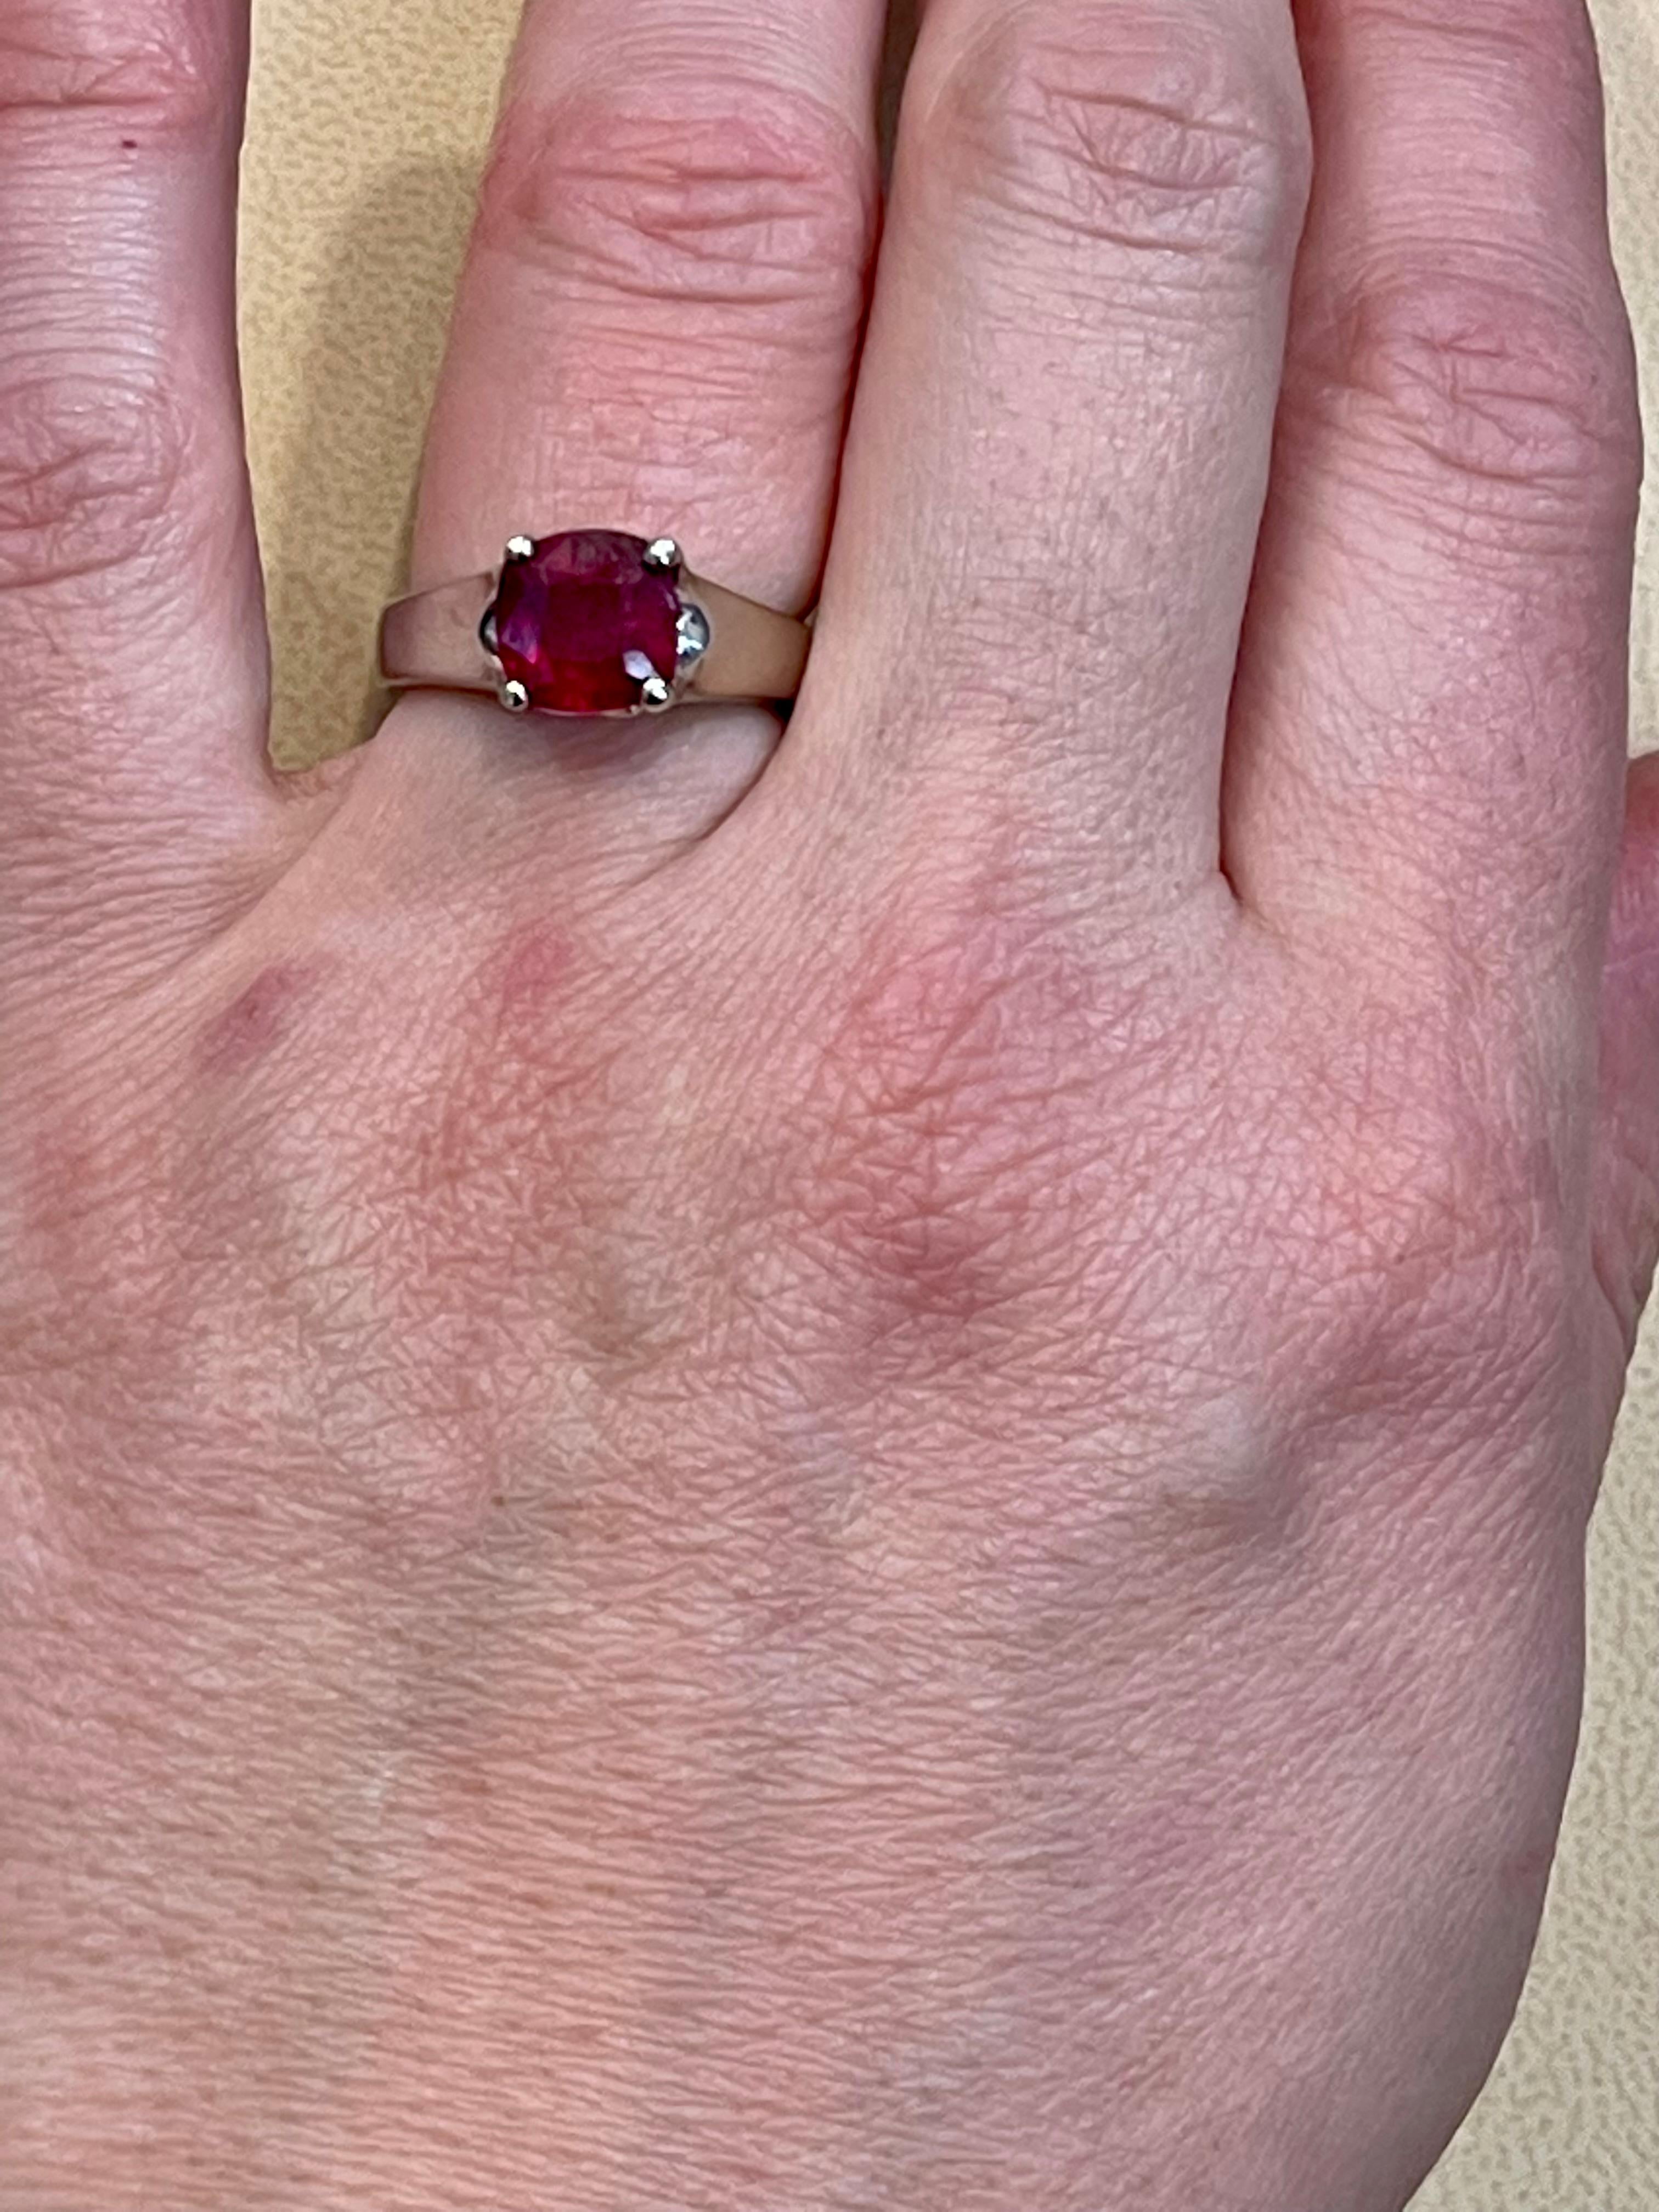 3.5 Carat Cushion Treated Ruby 14 Karat White Gold Ring In Excellent Condition For Sale In New York, NY